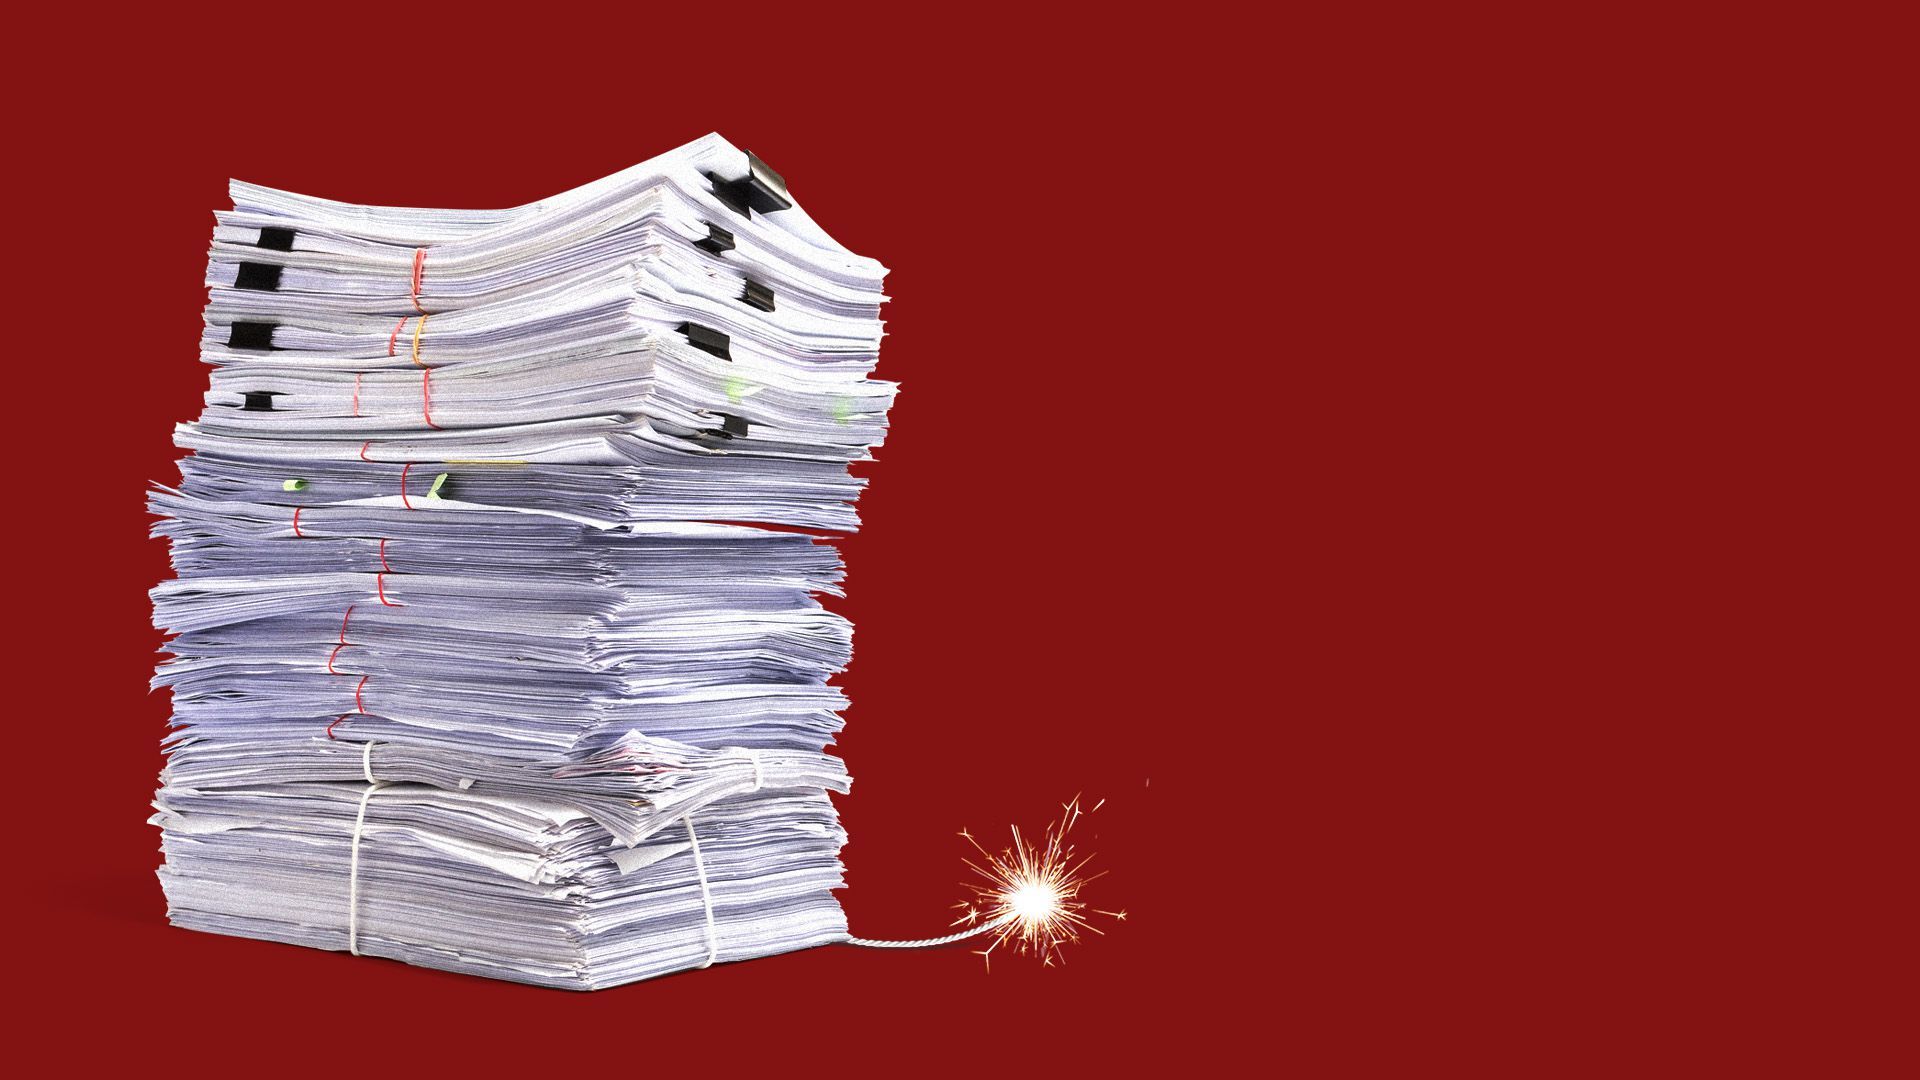 Illustration of a stack of documents with a lit fuse